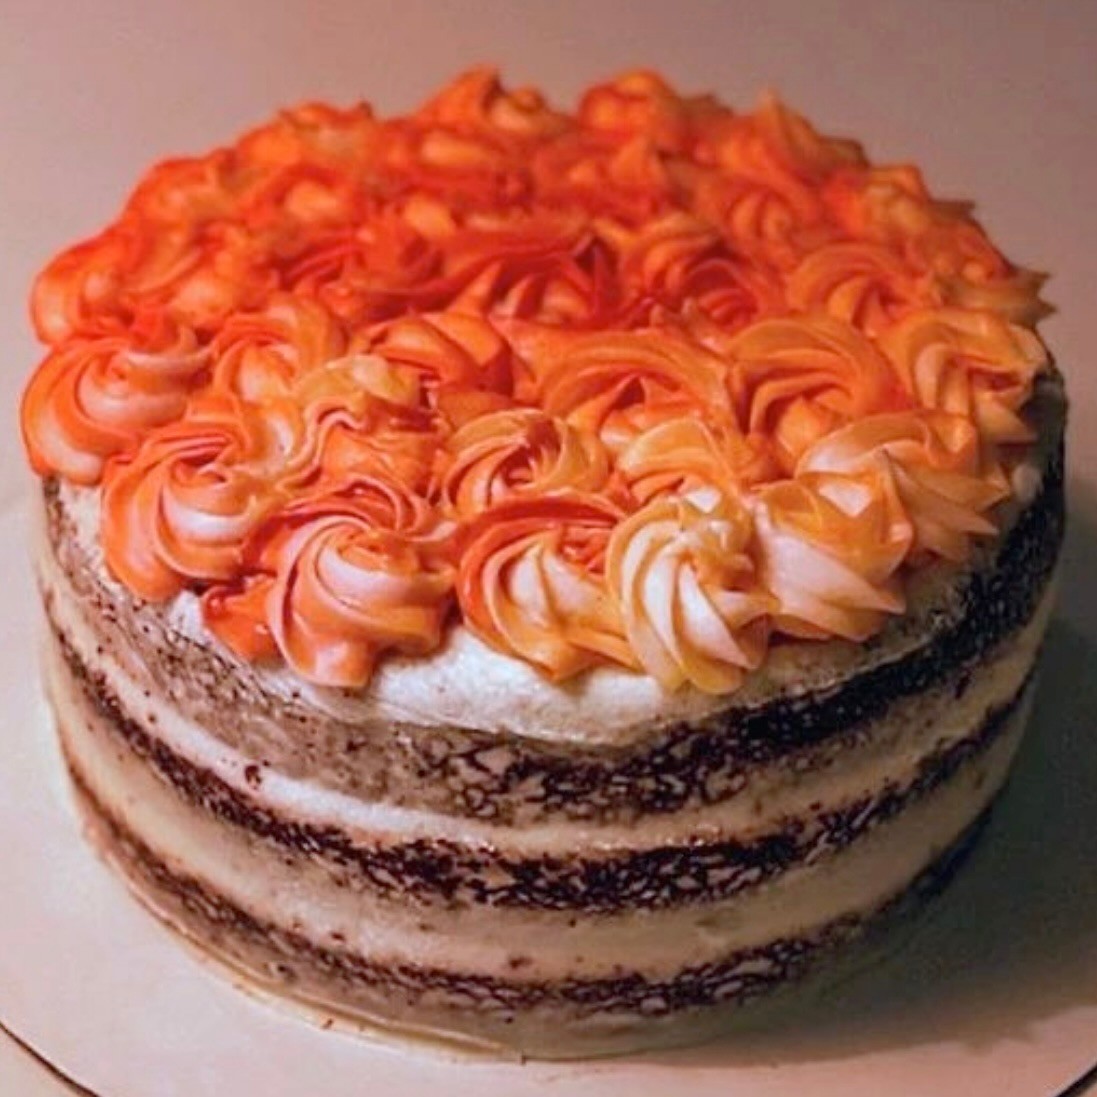 Image of Spiced (Carrot) Cake with Apple Filling and Cream Cheese Frosting